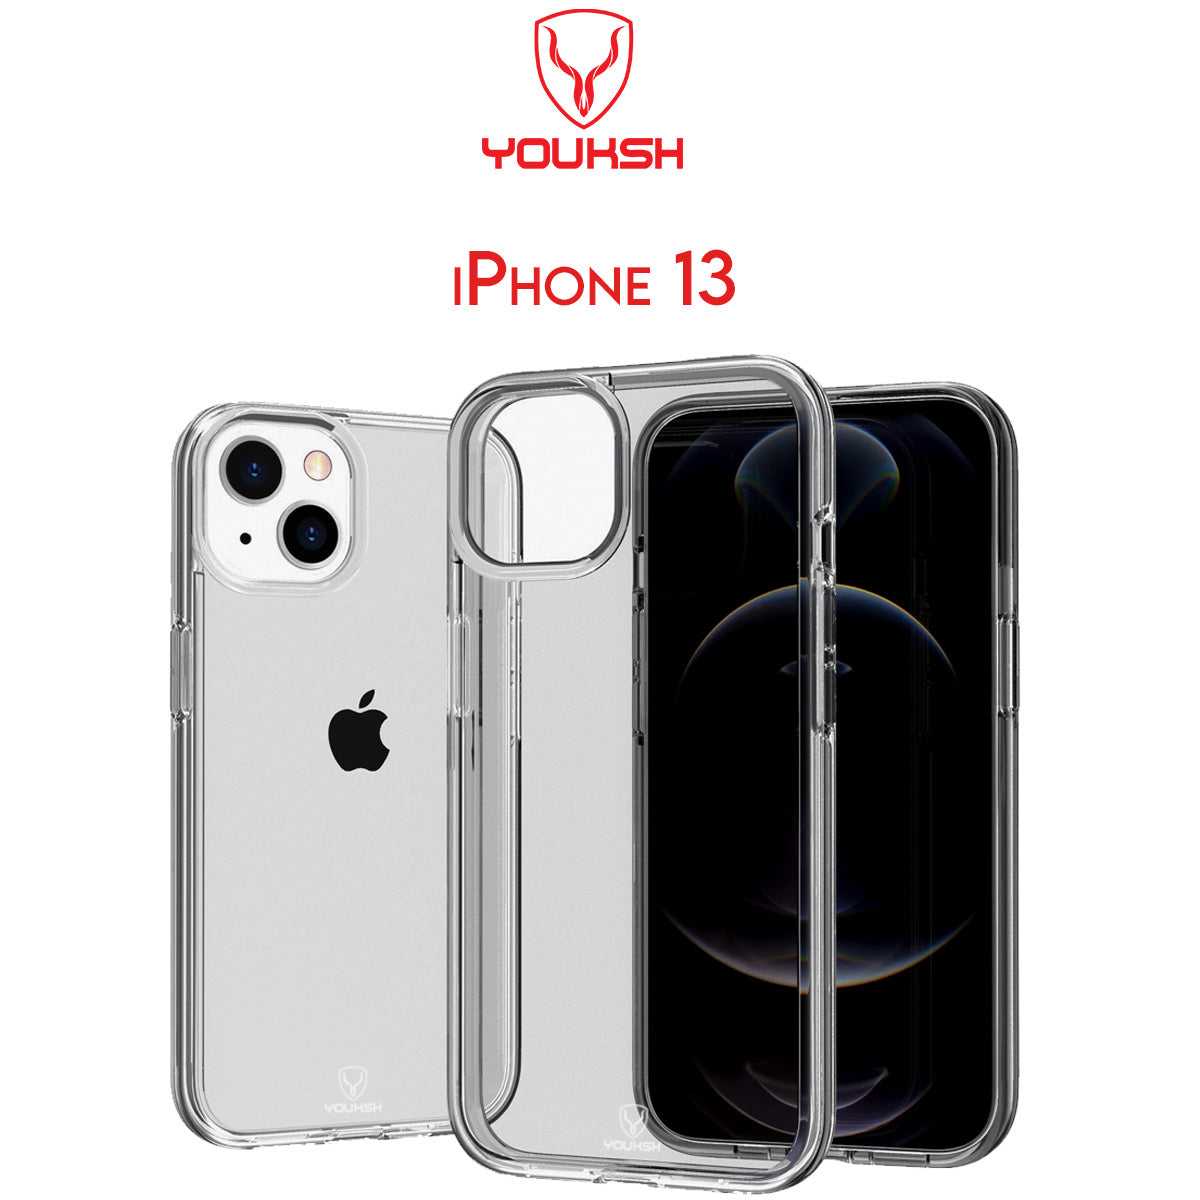 YOUSKH Apple iPhone 13 (6.1) Transparent Case - Youksh iPhone 13 (6.1) Transparent Cover - Transparent Soft Shock Proof Jelly Back Cover.